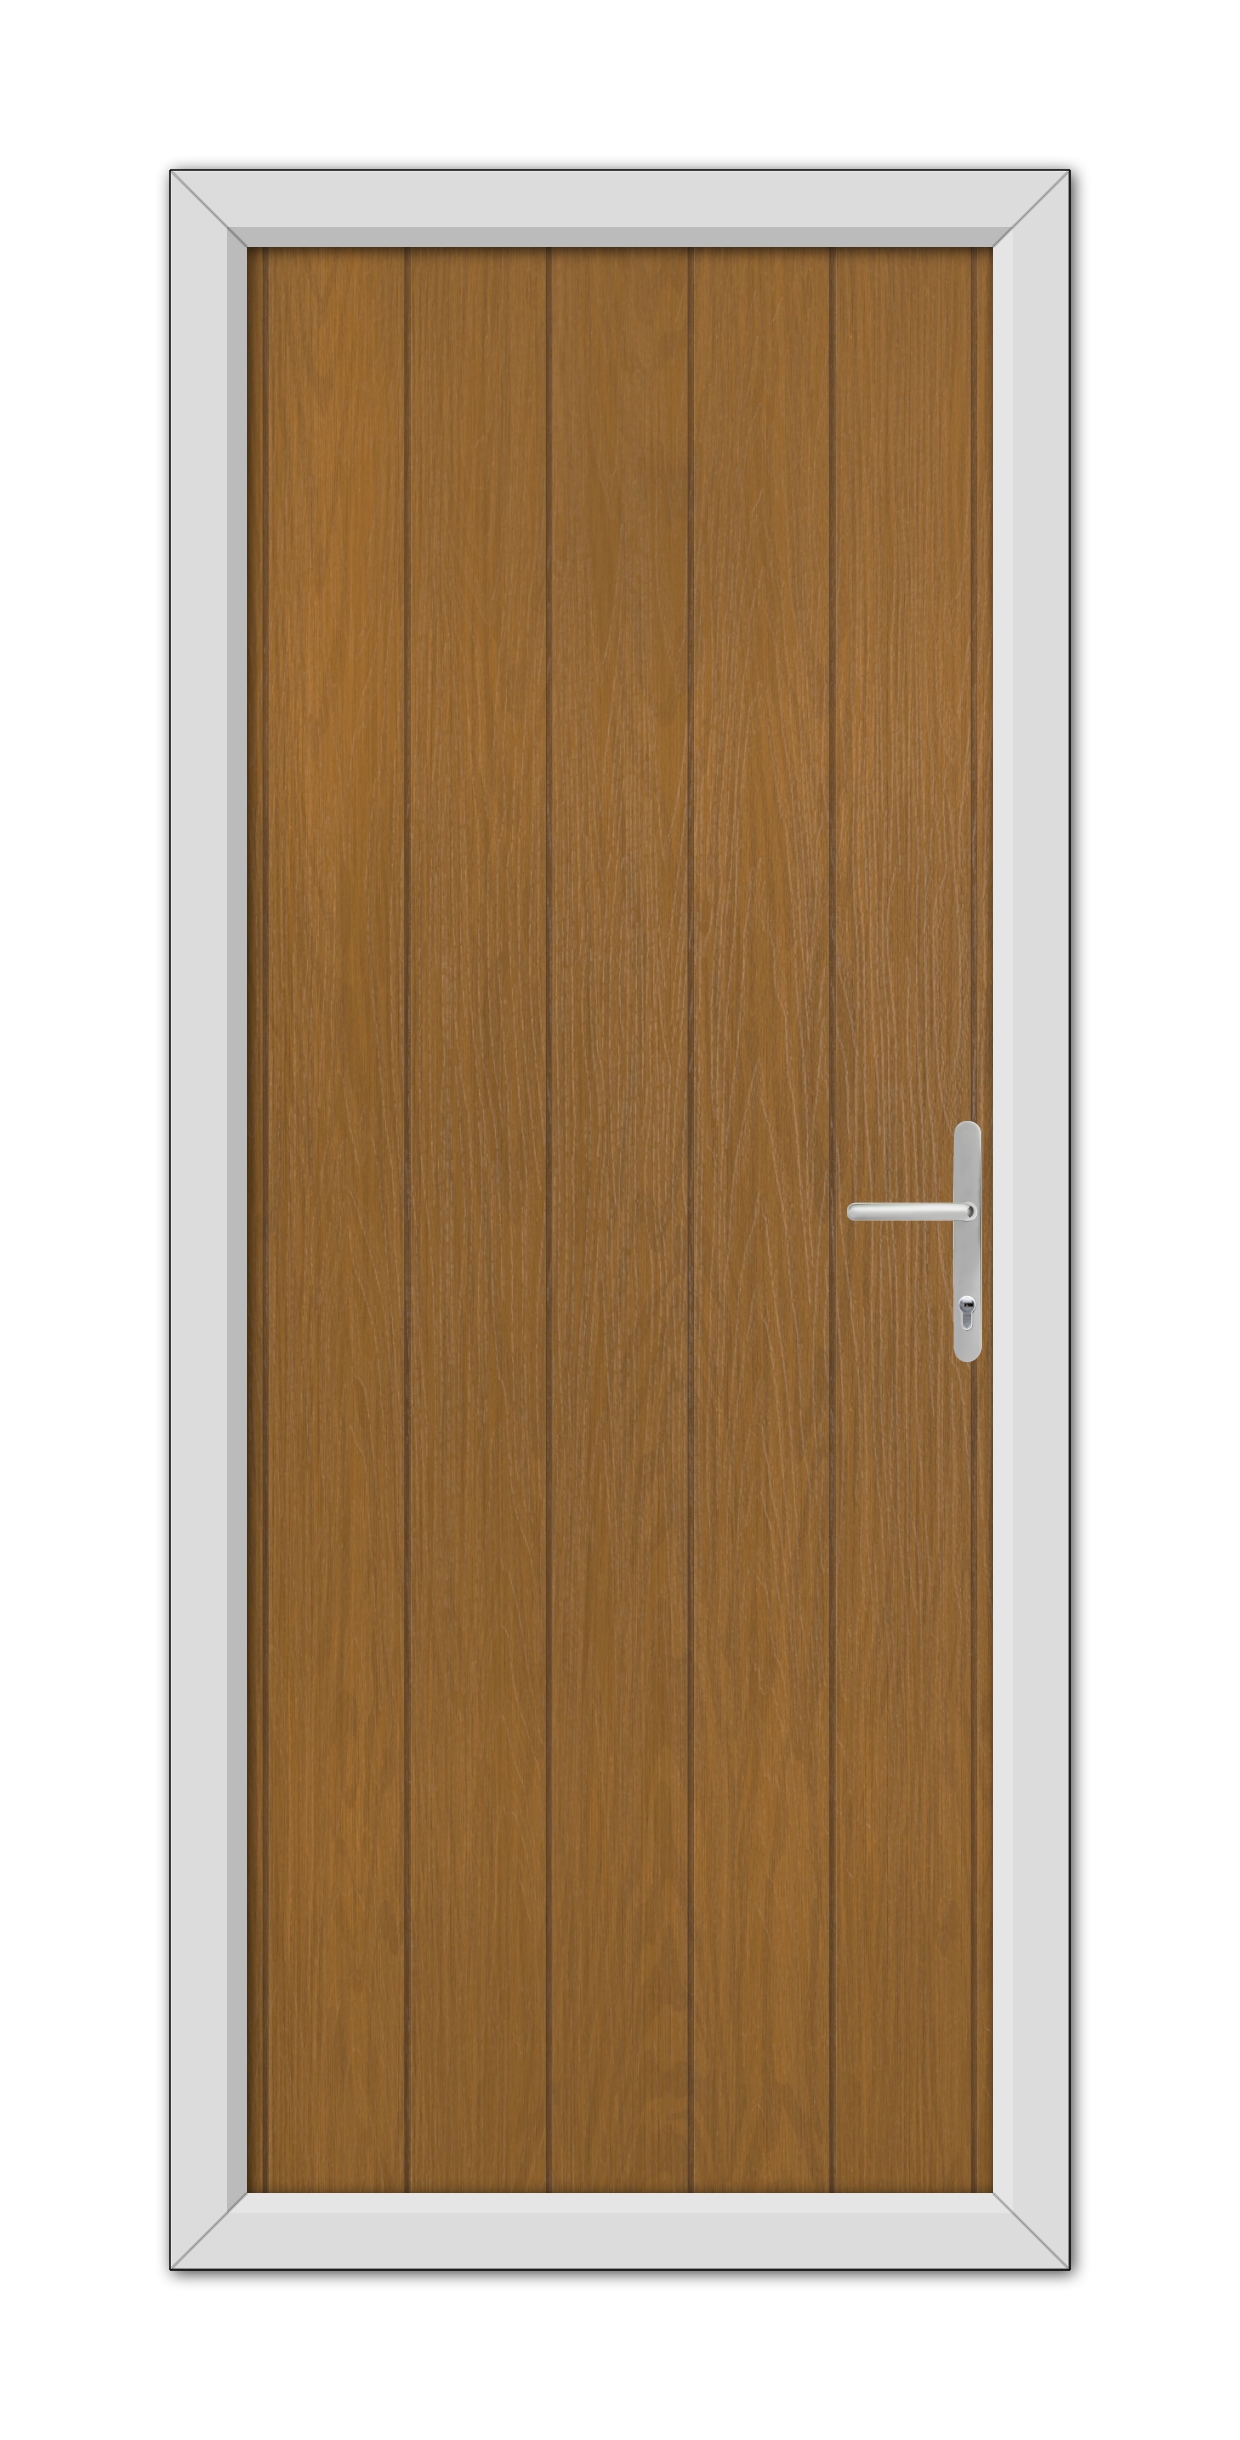 A closed Oak Gloucester Composite Door 48mm Timber Core with a metal handle, framed by a white border, viewed head-on.